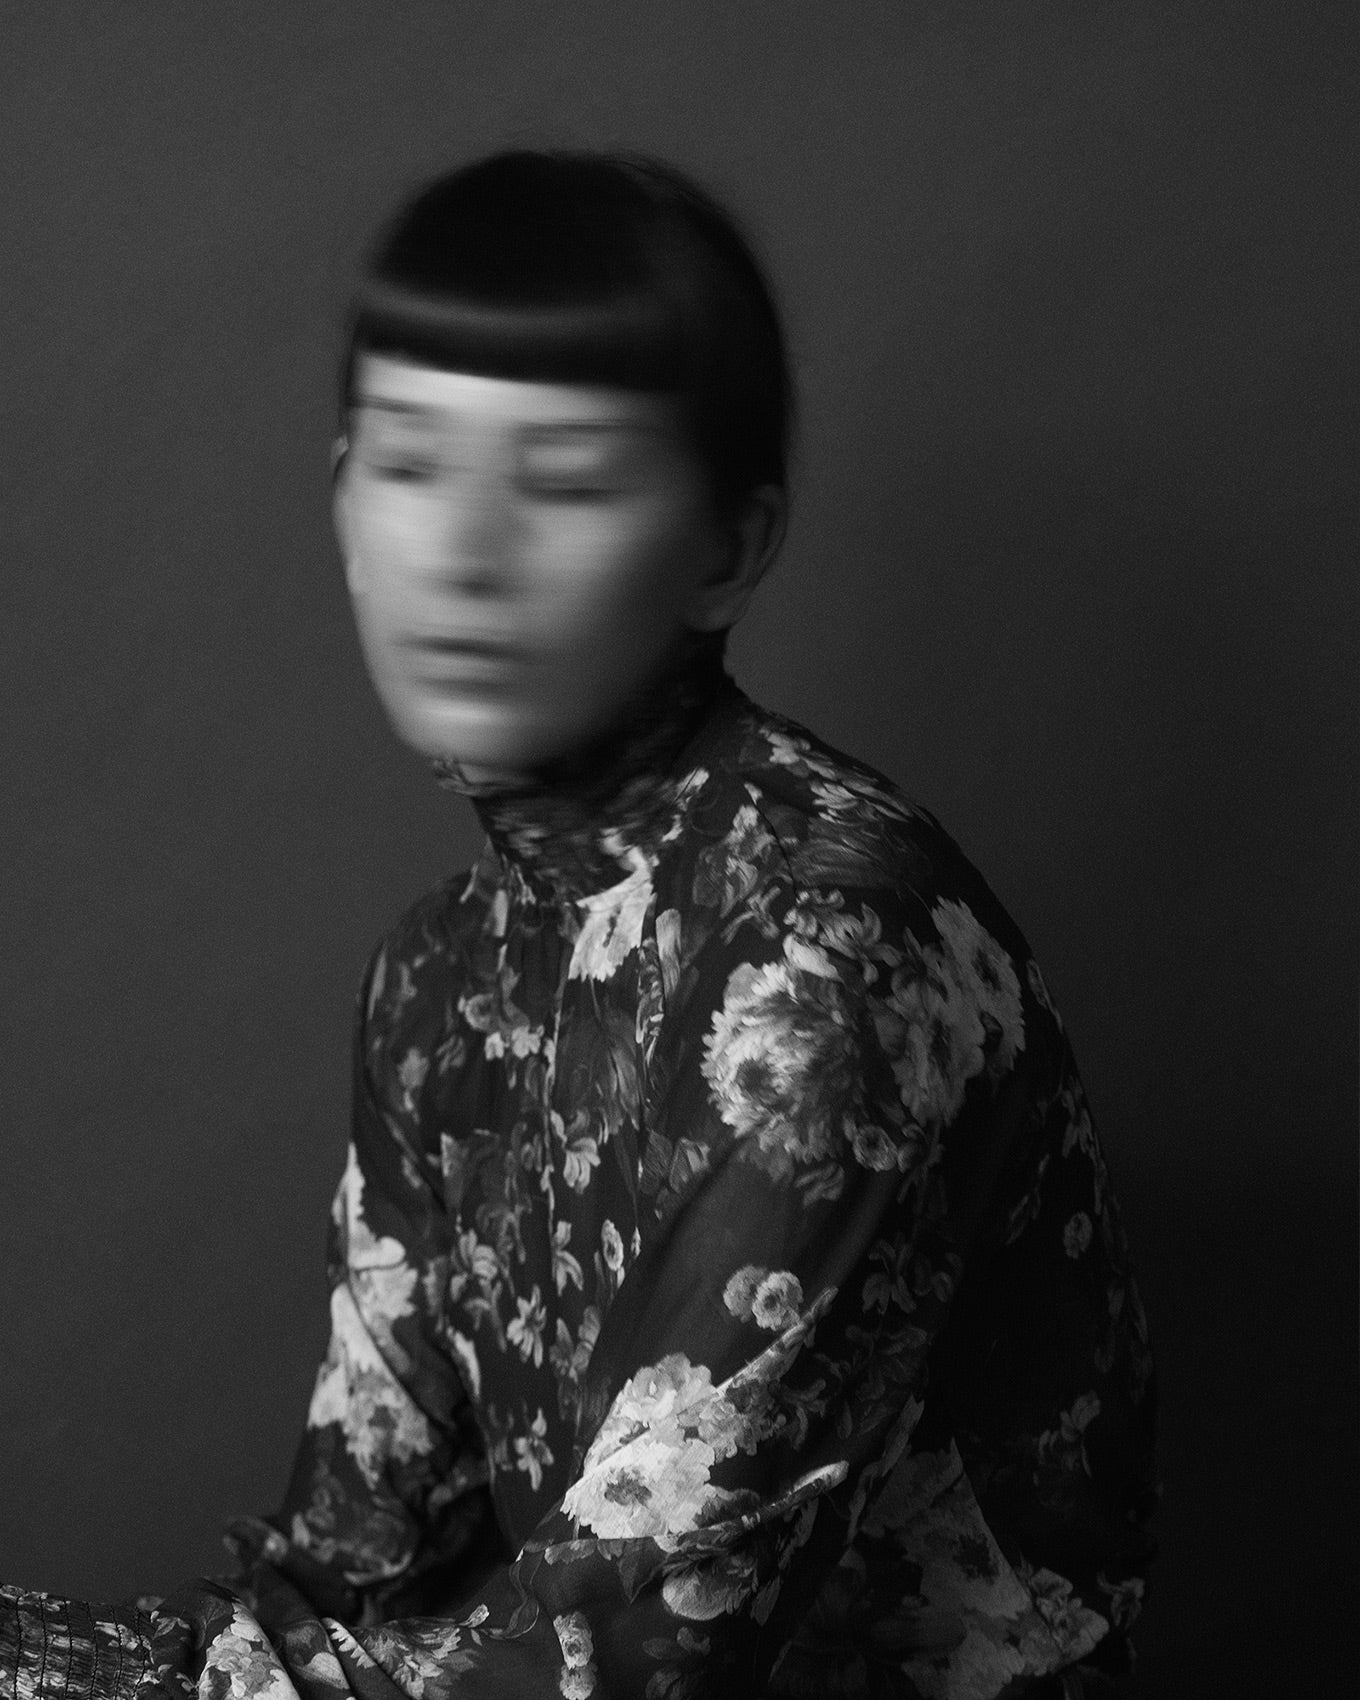 Portrait of photographer Gabriela Silveira in black and white with motion blur. Gabriela sits with her eyes closed with her arms folded wearing a floral top.